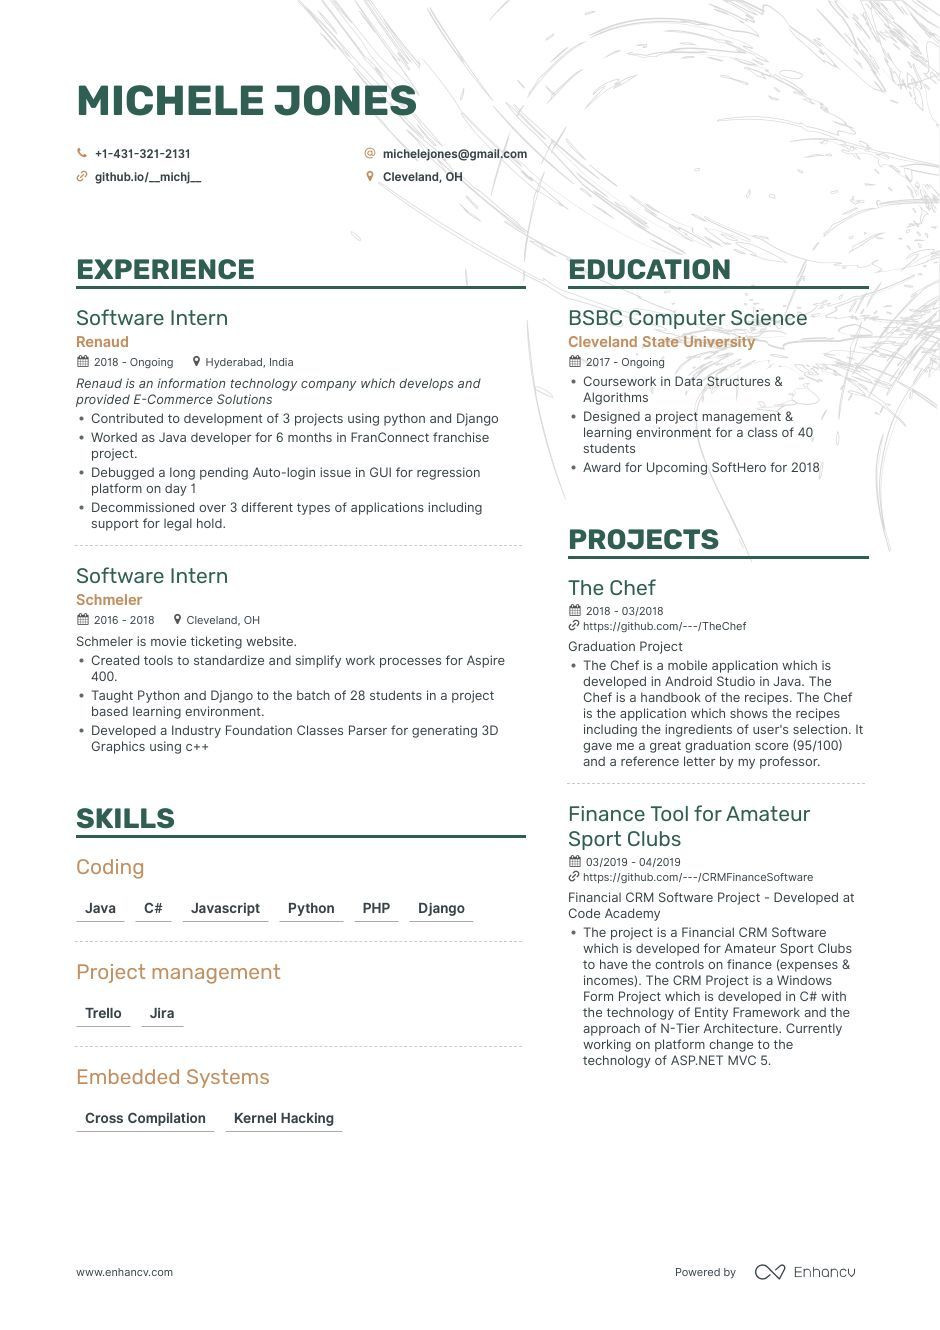 6 Months Experience Resume Sample In software Testing software Engineer Resume Examples & Guide for 2022 (layout, Skills …